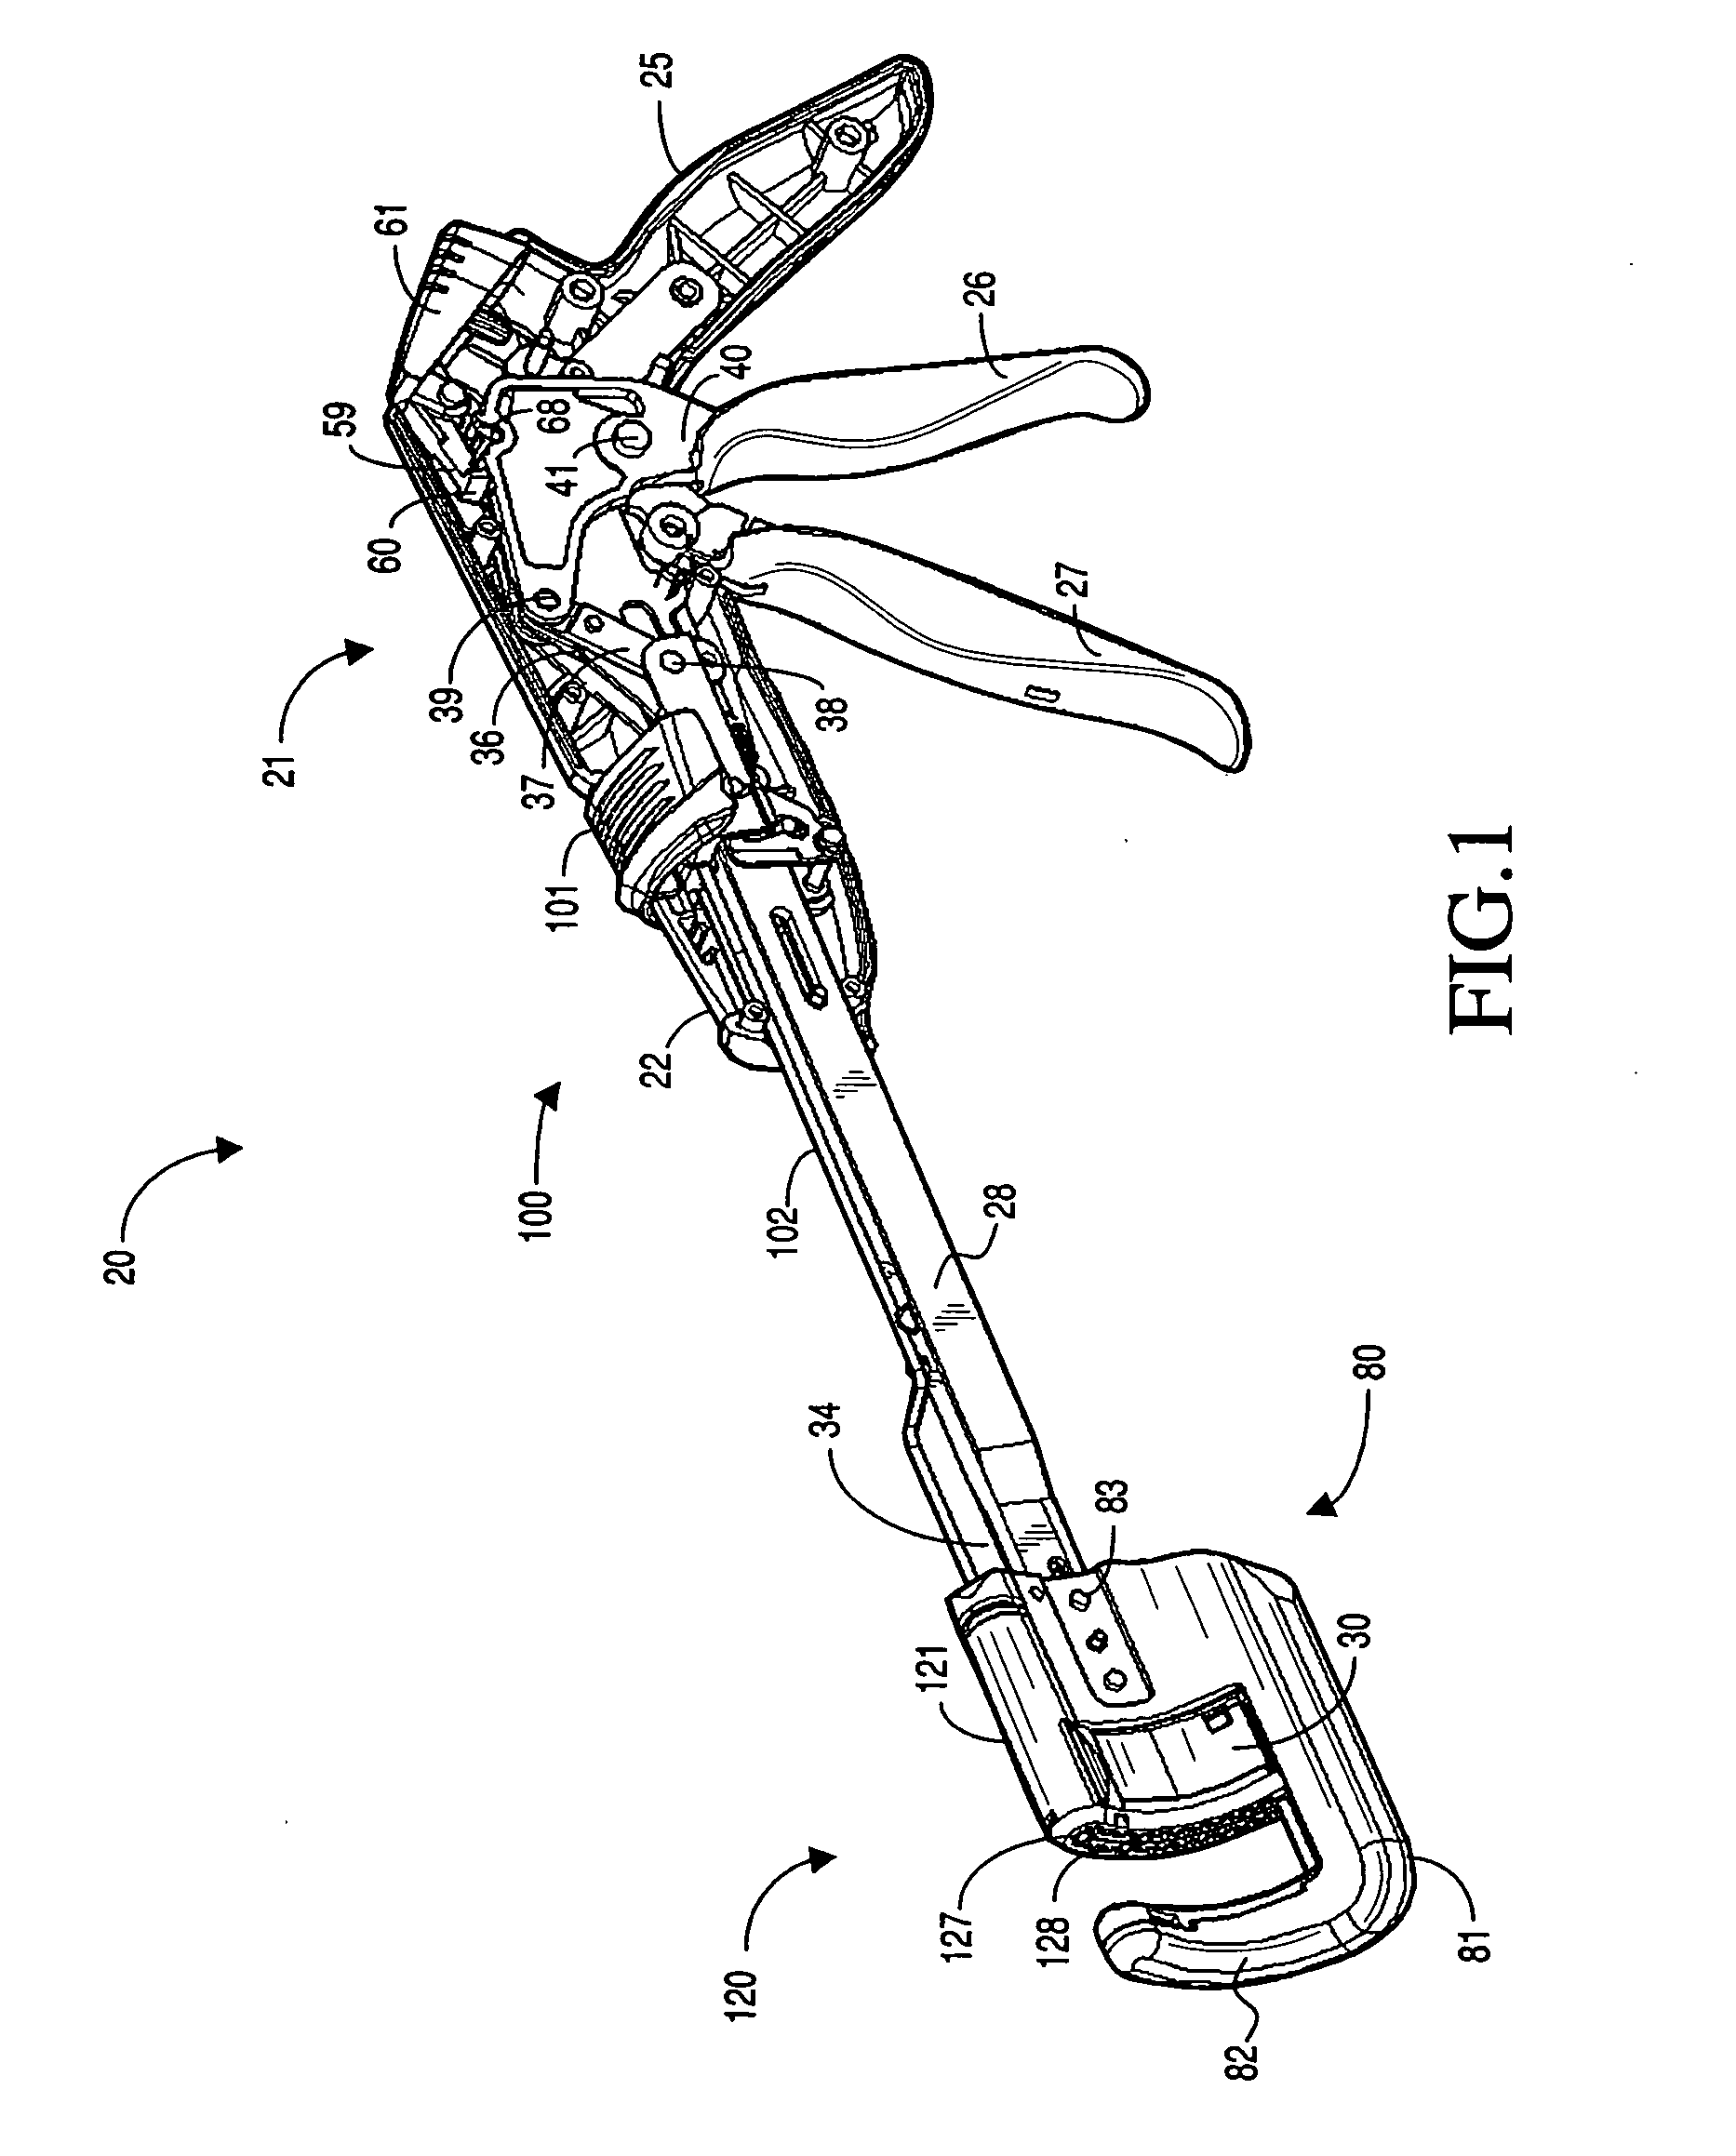 Curved cutter stapler shaped for male pelvis